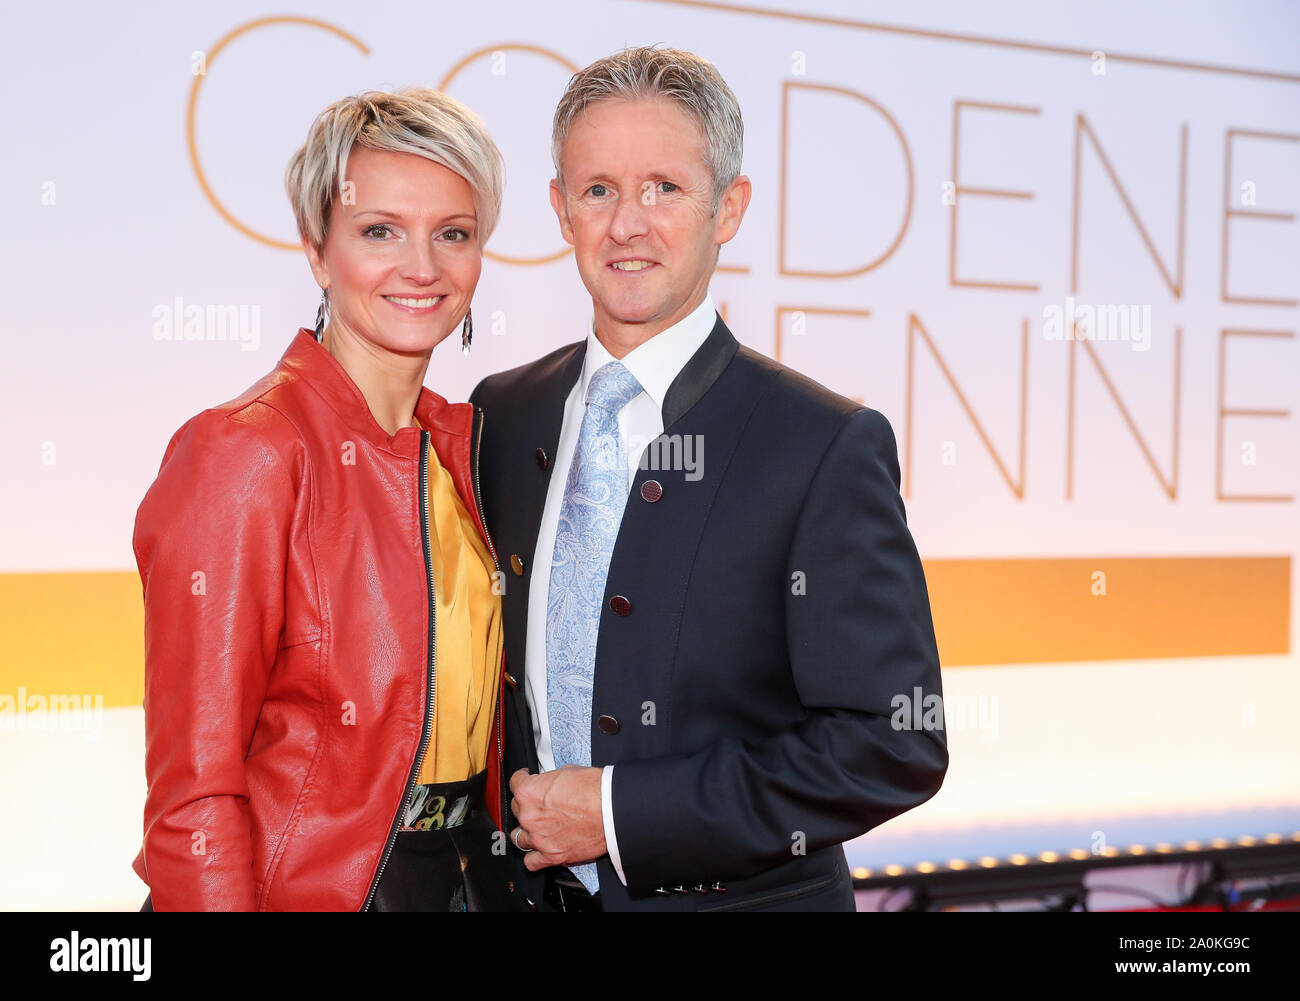 Leipzig, Germany. 20th Sep, 2019. Jens Weißflog, former ski jumper, comes with his wife Doreen to the television gala 'Goldene Henne'. A total of 53 nominees from show business, society and sport can hope for the award. The Golden Hen is dedicated to the GDR entertainer Hahnemann, who died in 1991. Credit: Jan Woitas/dpa-Zentralbild/dpa/Alamy Live News Stock Photo